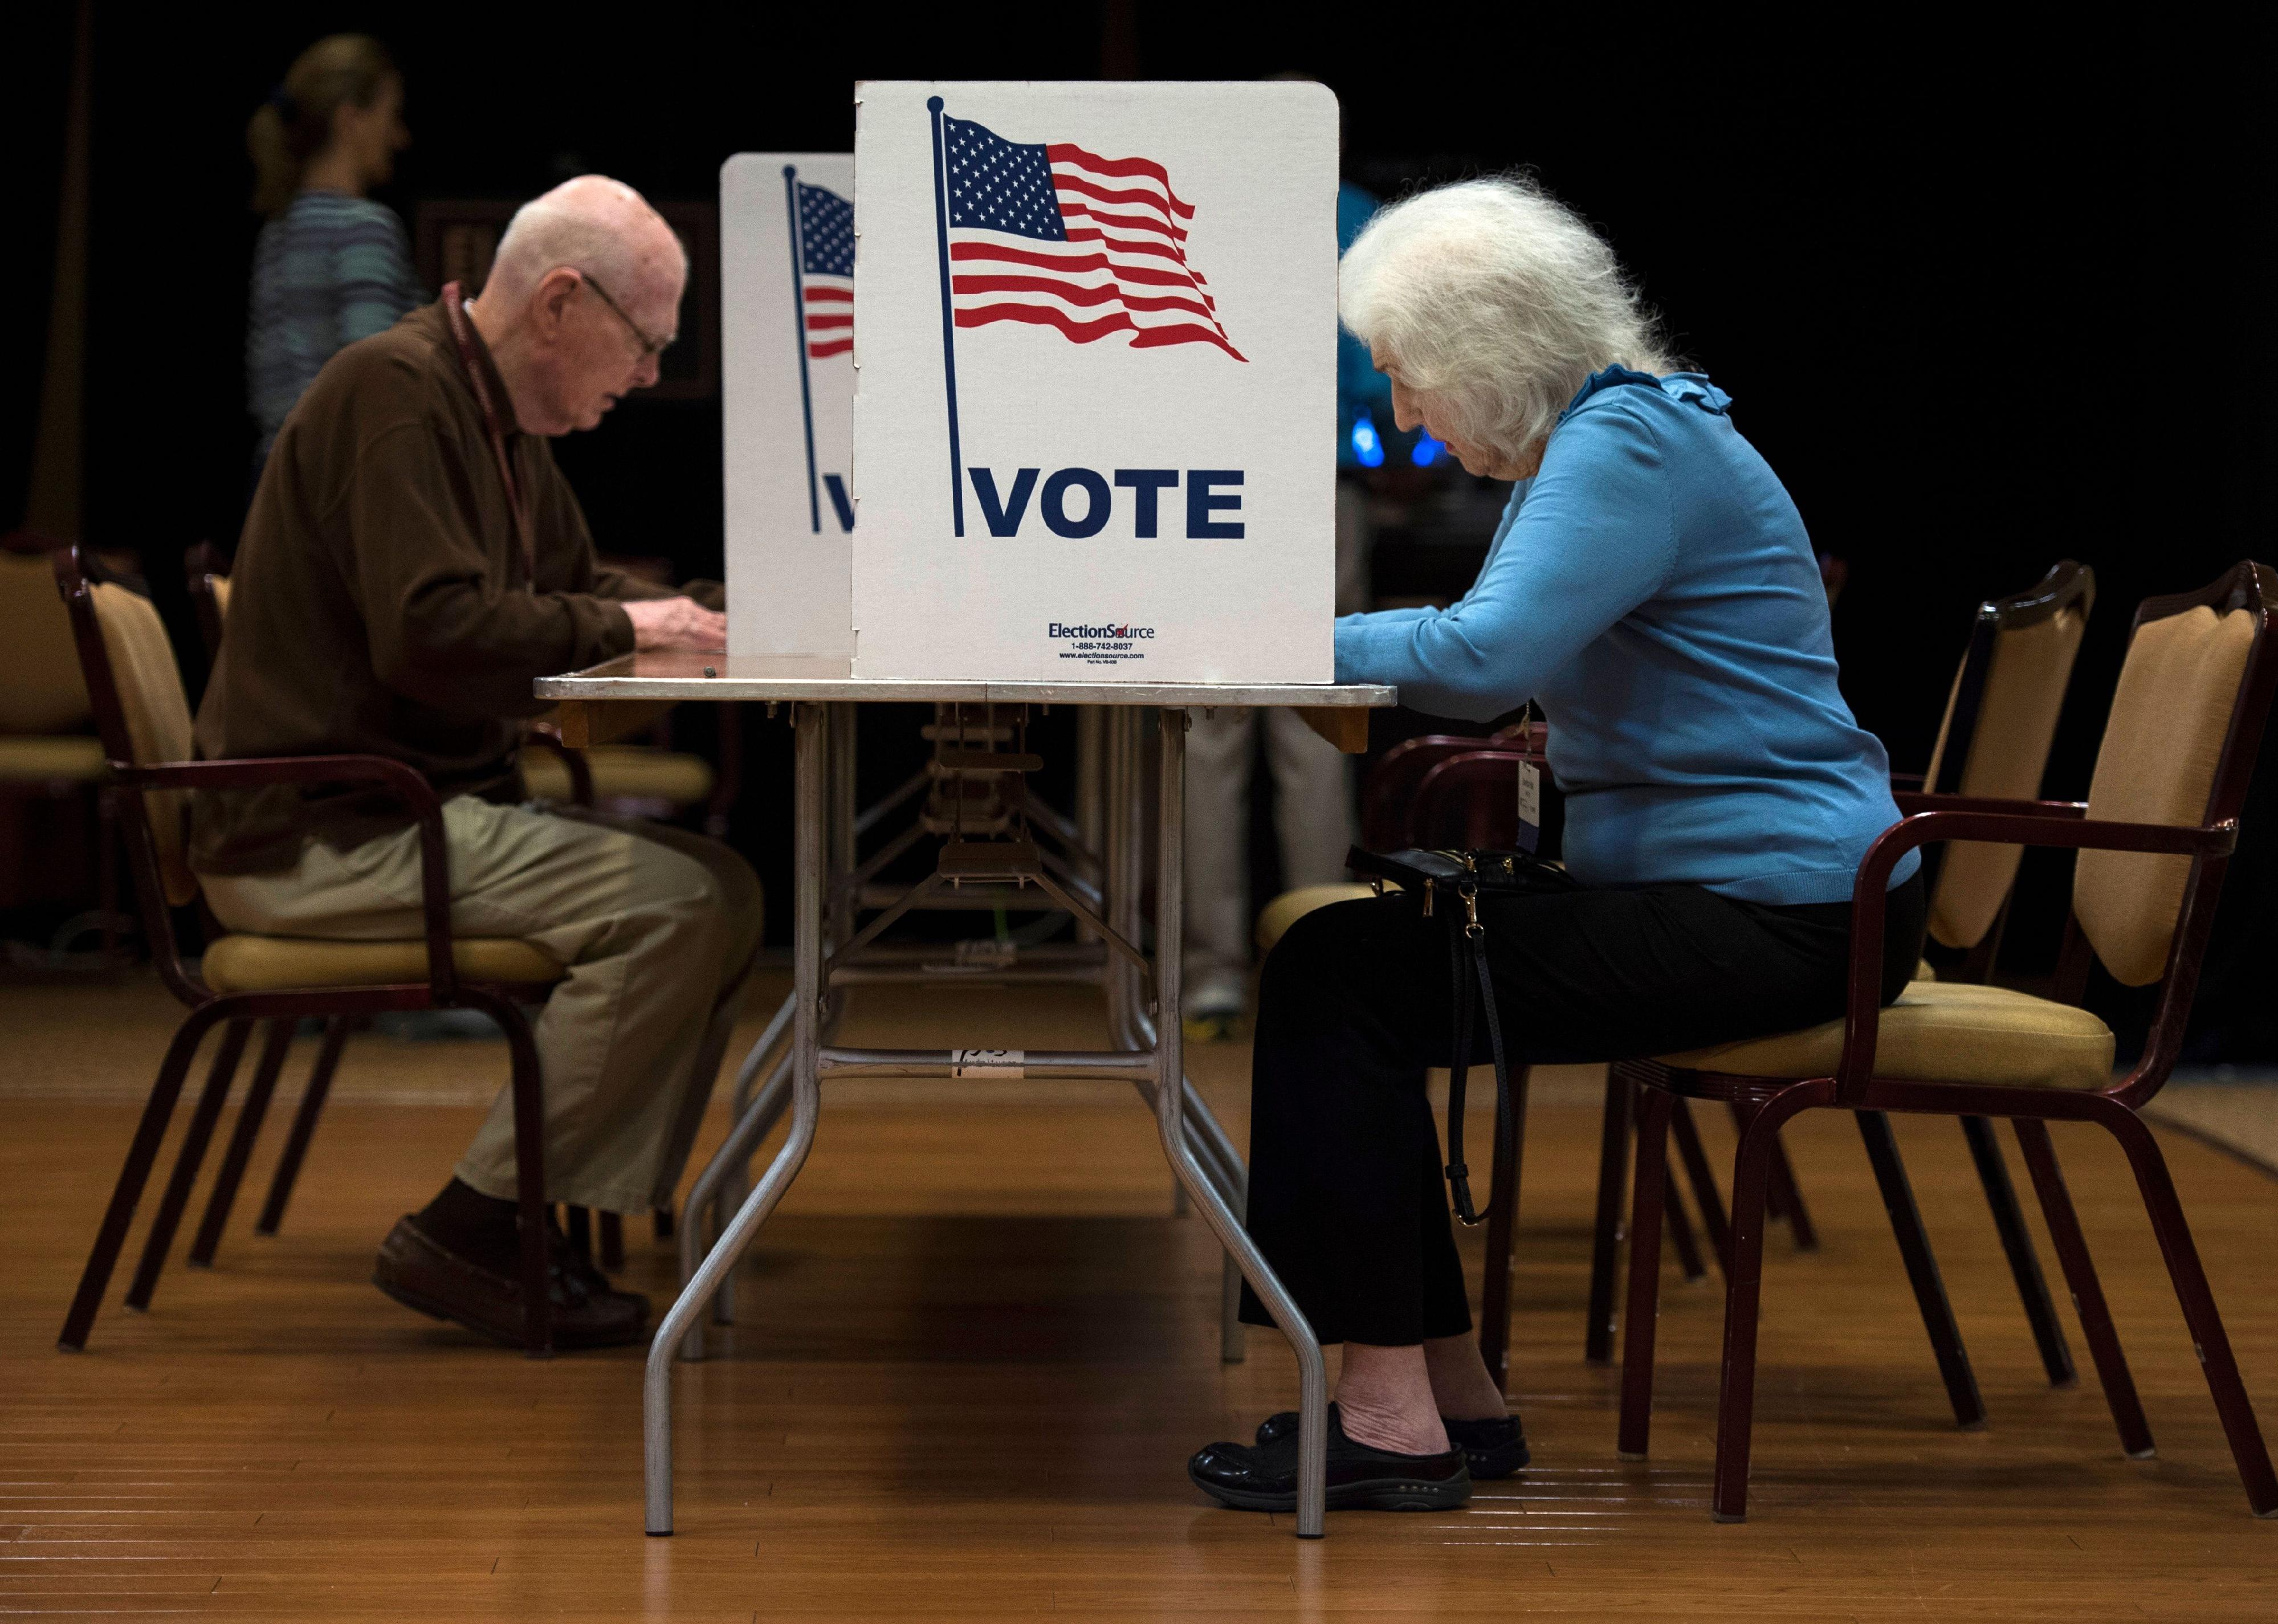 People vote at the Greenspring Retirement center during the mid-term election day in Fairfax, Virginia 